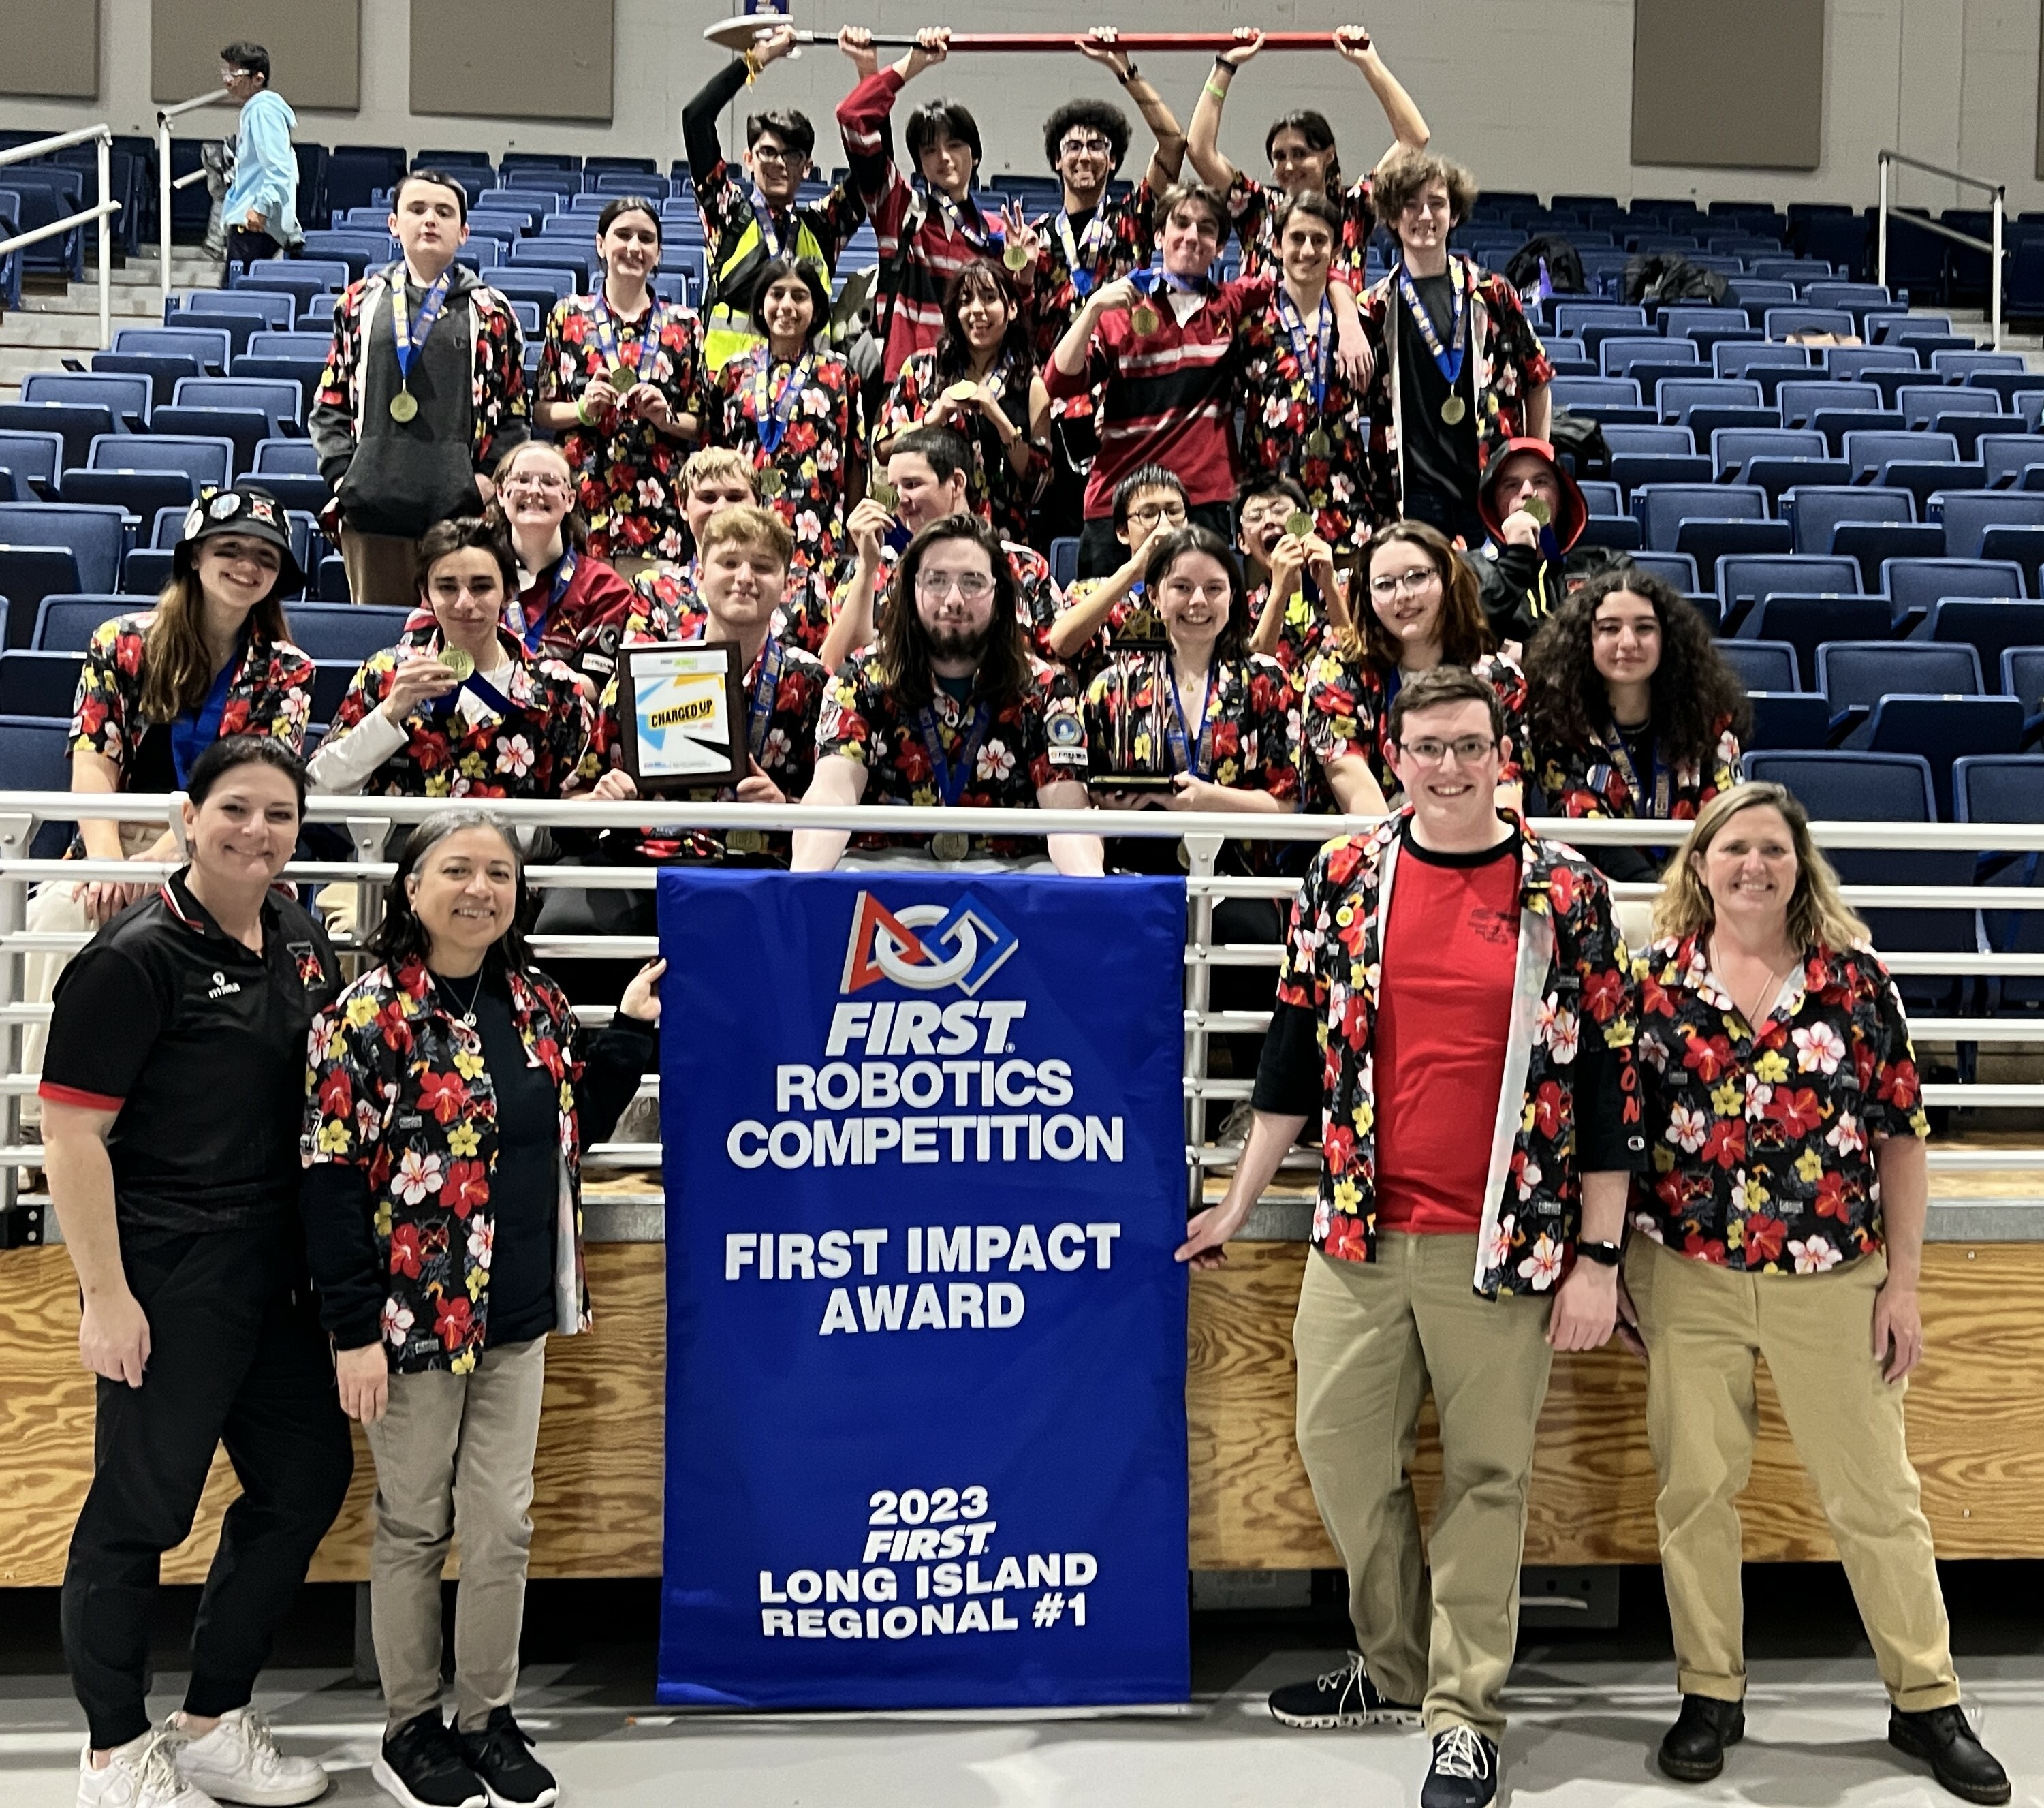 The combined Pierson Southampton robotics team earned the prestigious Impact Award at a First Robotics regional competition at Hofstra University. Winning the award automatically qualified the team for a spot at the First Robotics Worlds in Texas next month.